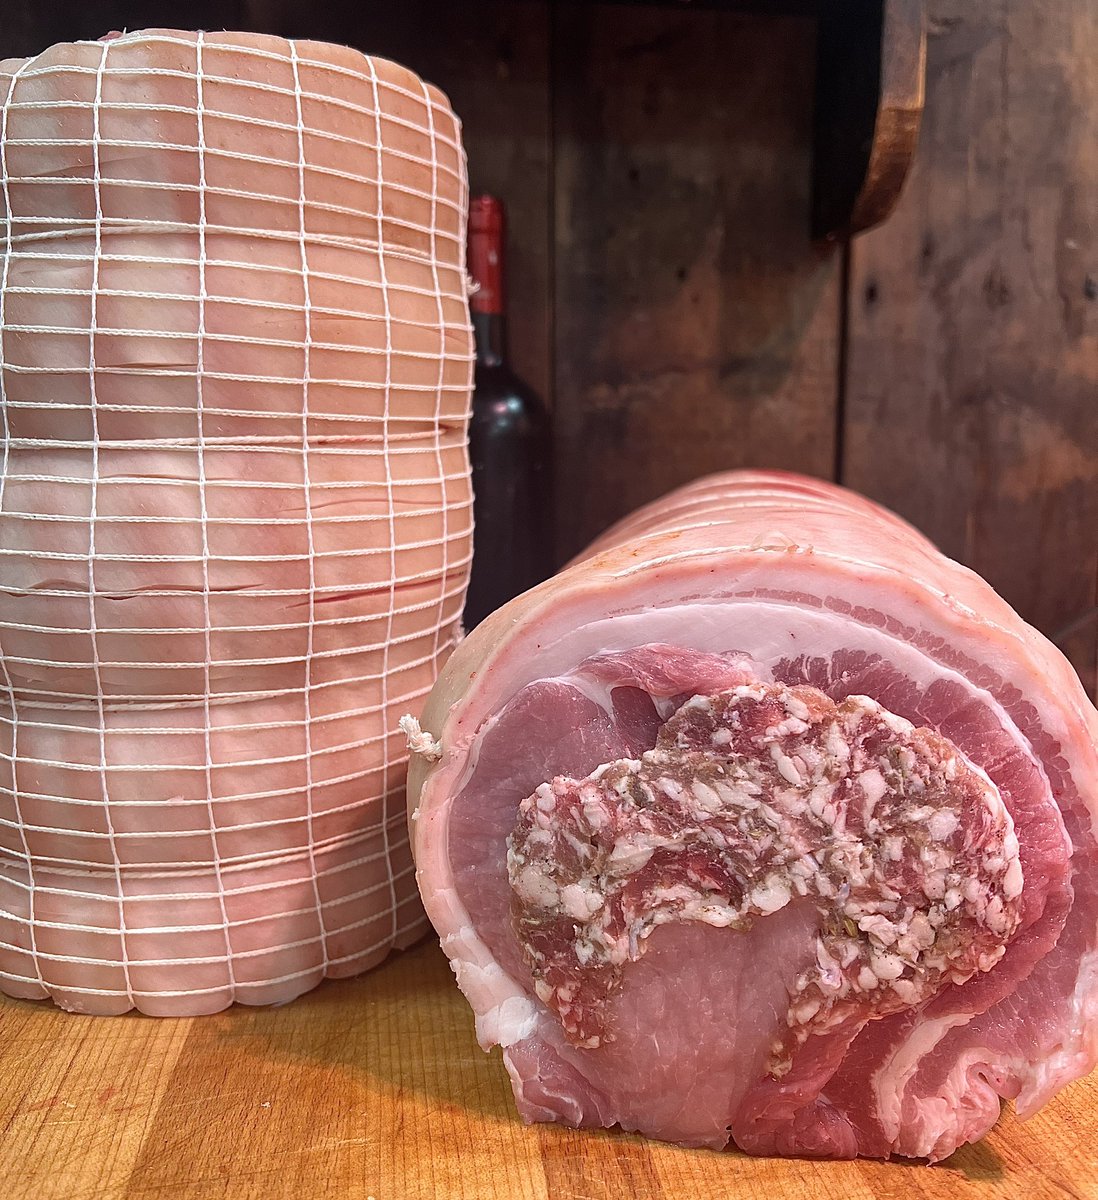 Porcetta prep today for a client, stuffed with Italian Sausage meat with fennel and chilli 🤌🤌🤌

I was dreaming of the sandwiches while I was packing this order 😋😋😋

#higginsbutchers #freerangepork #irishpork #porcetta #salsiccia #italian